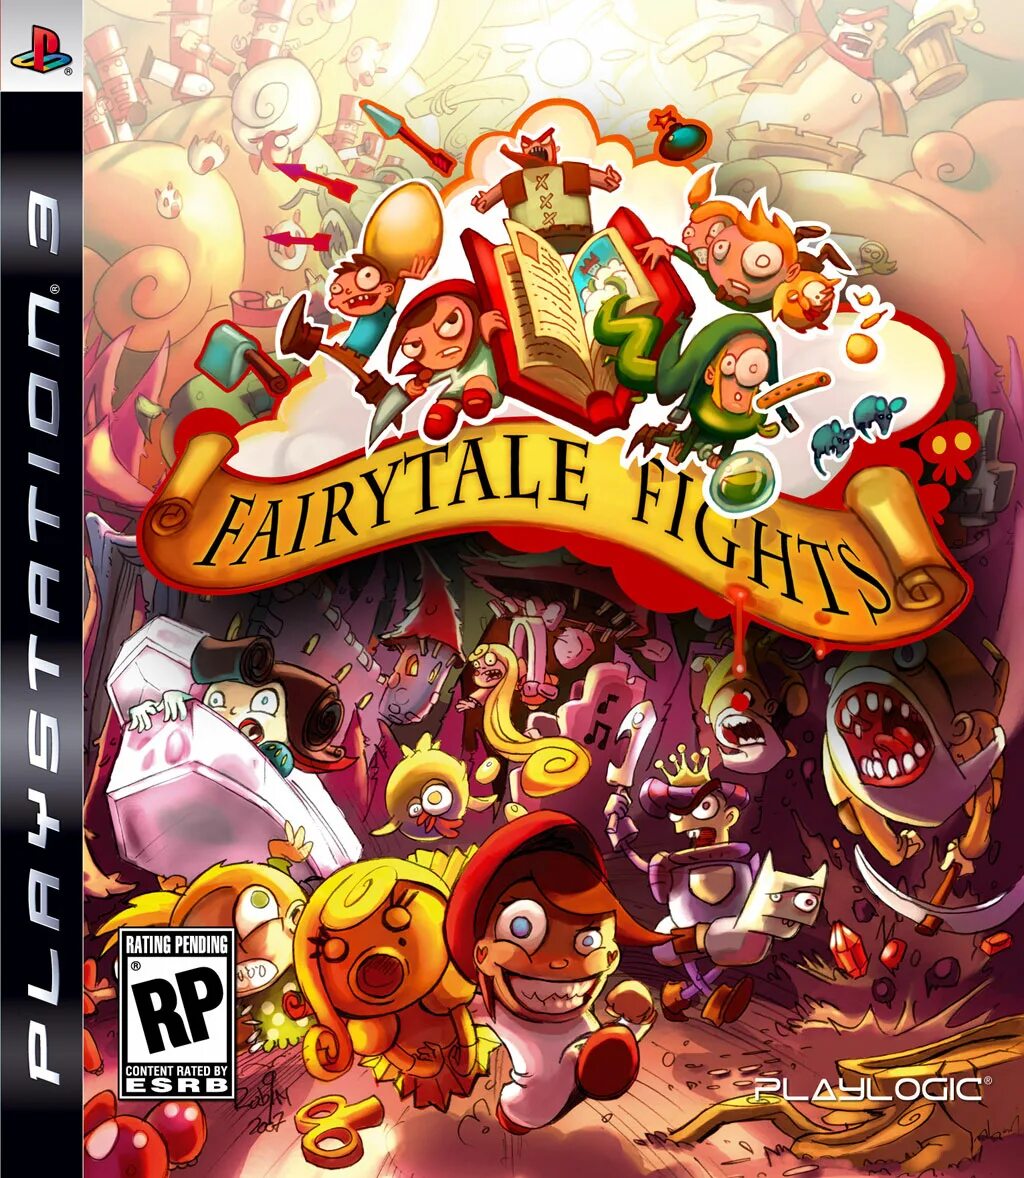 Fairytale Fights ps3. PLAYSTATION 3 игры. Fairy Tale Fight ps3. Fight Tales ps3. Tales ps3